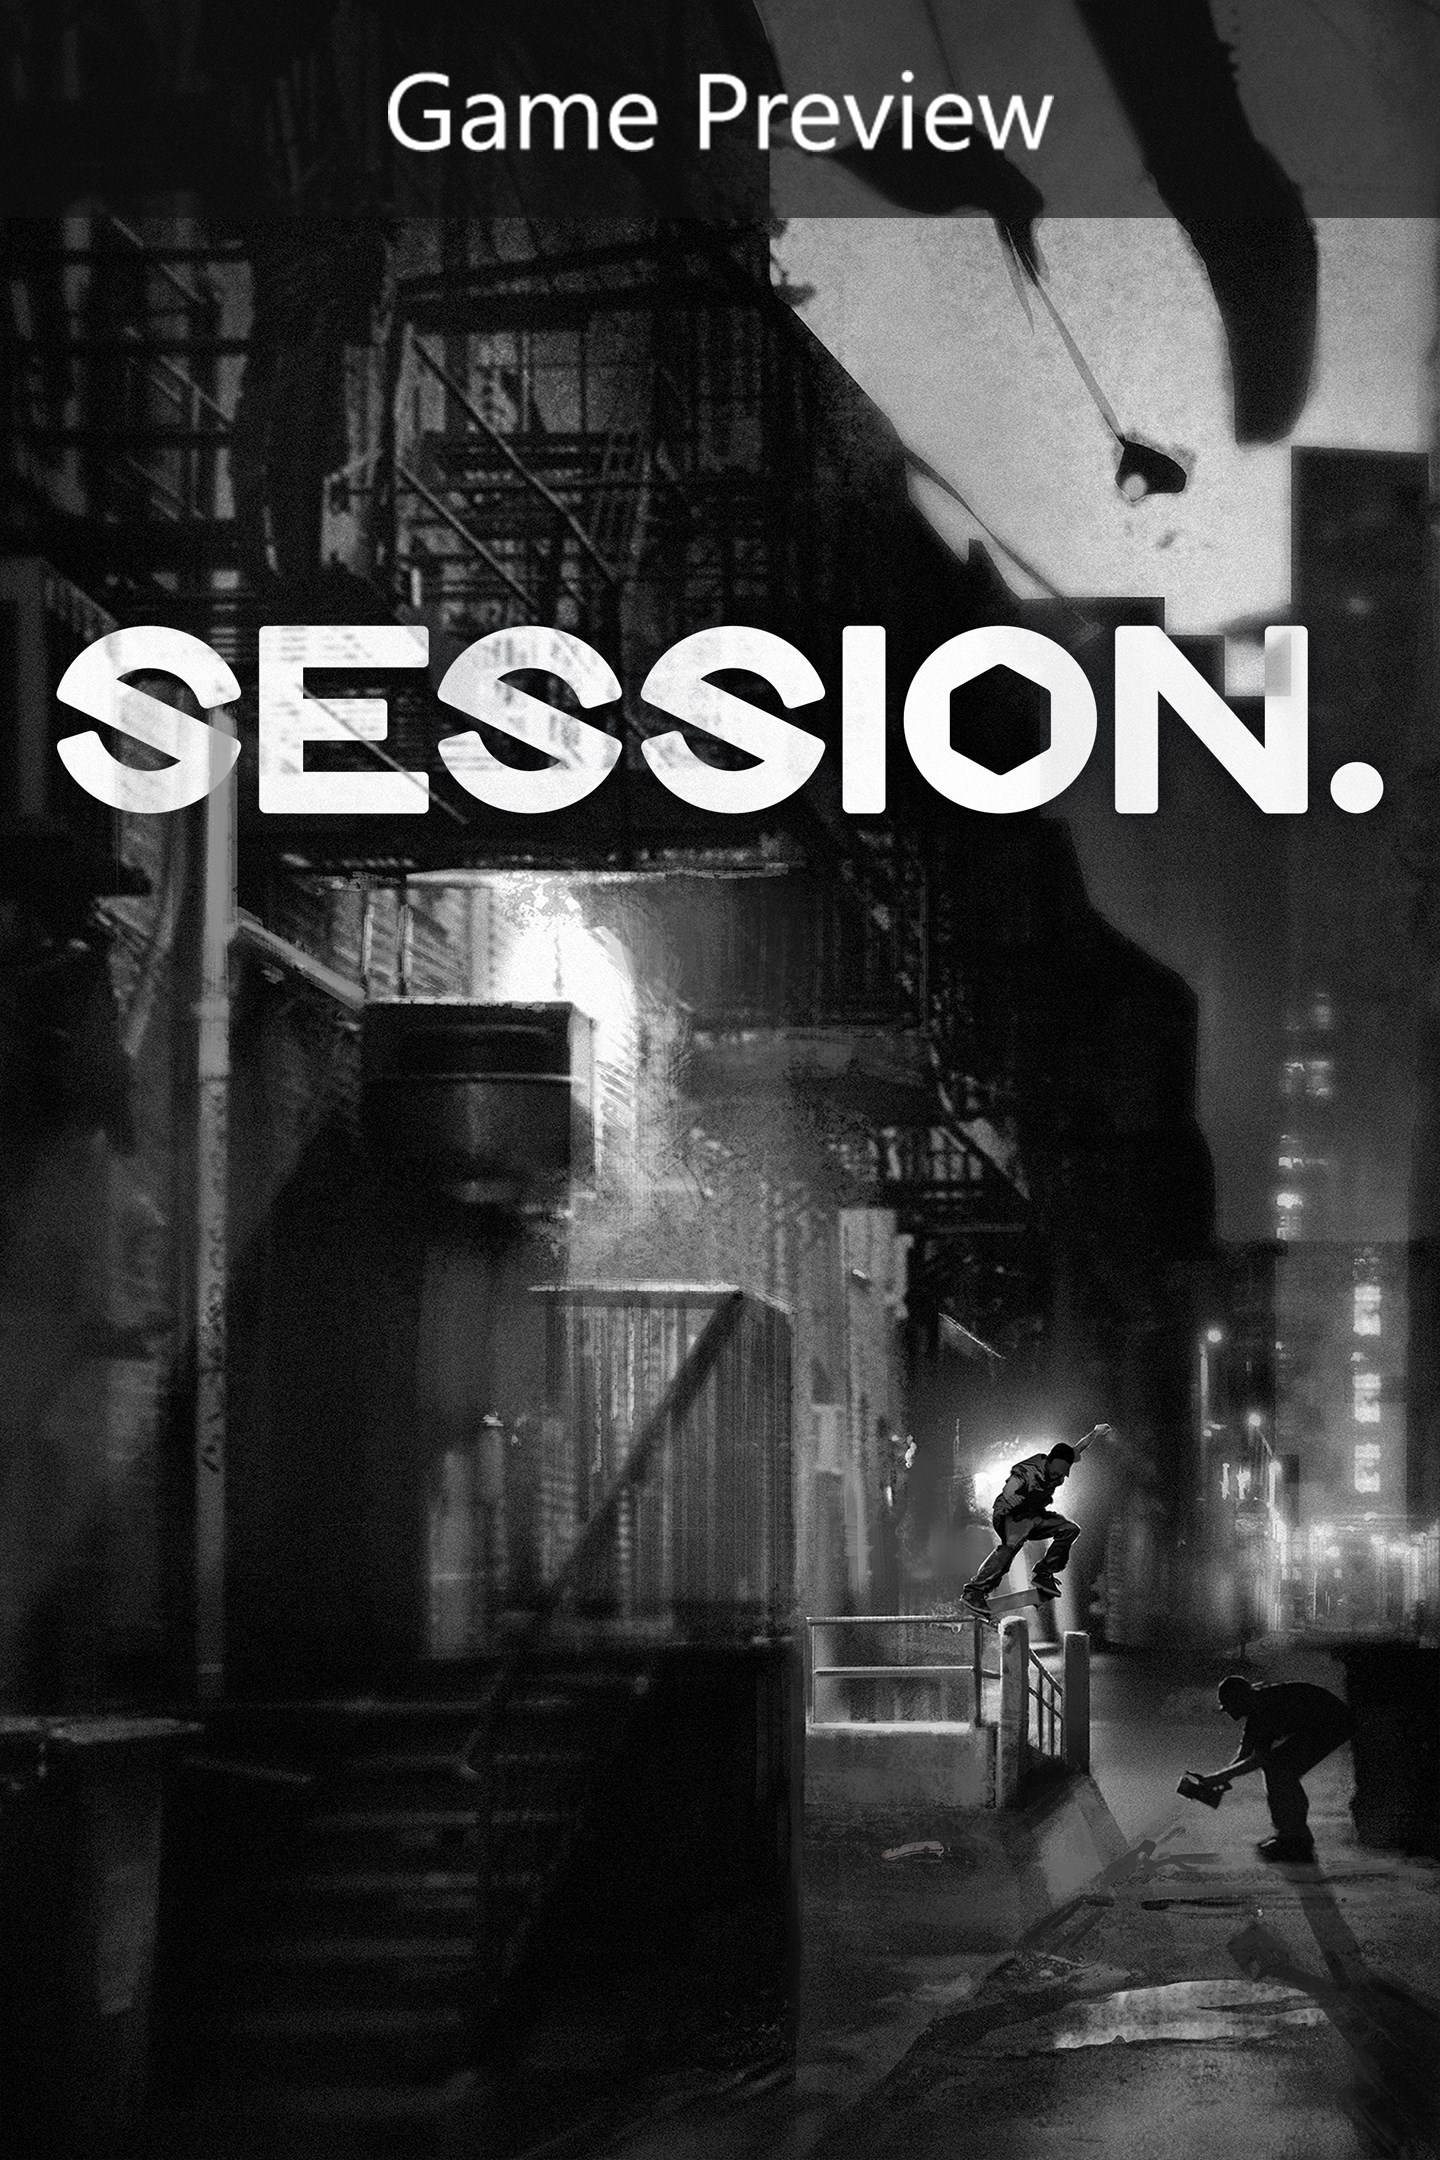 session game xbox one